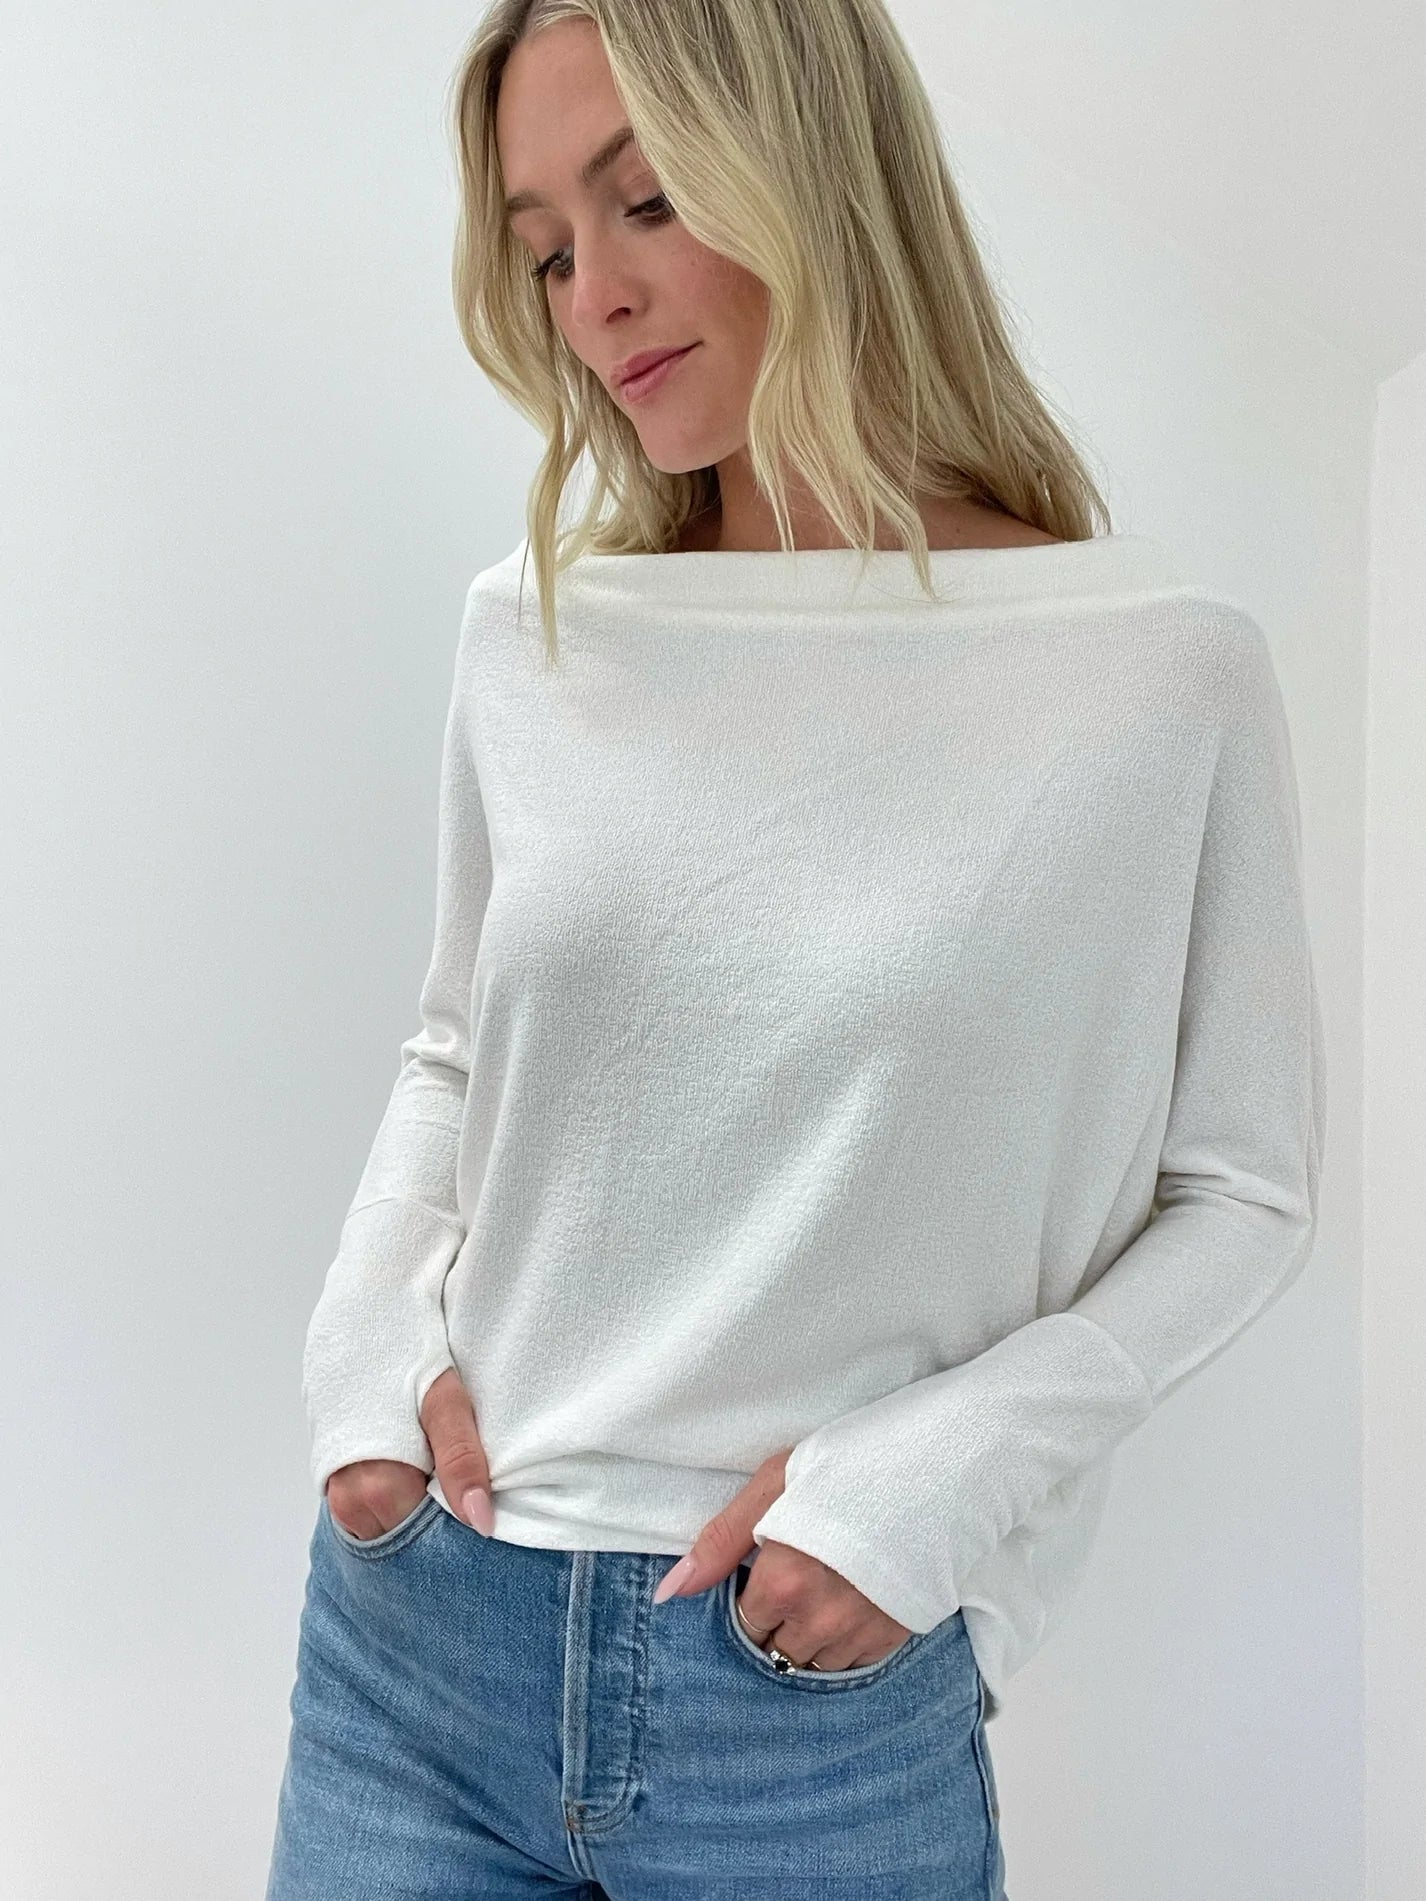 The Anywhere Top in White